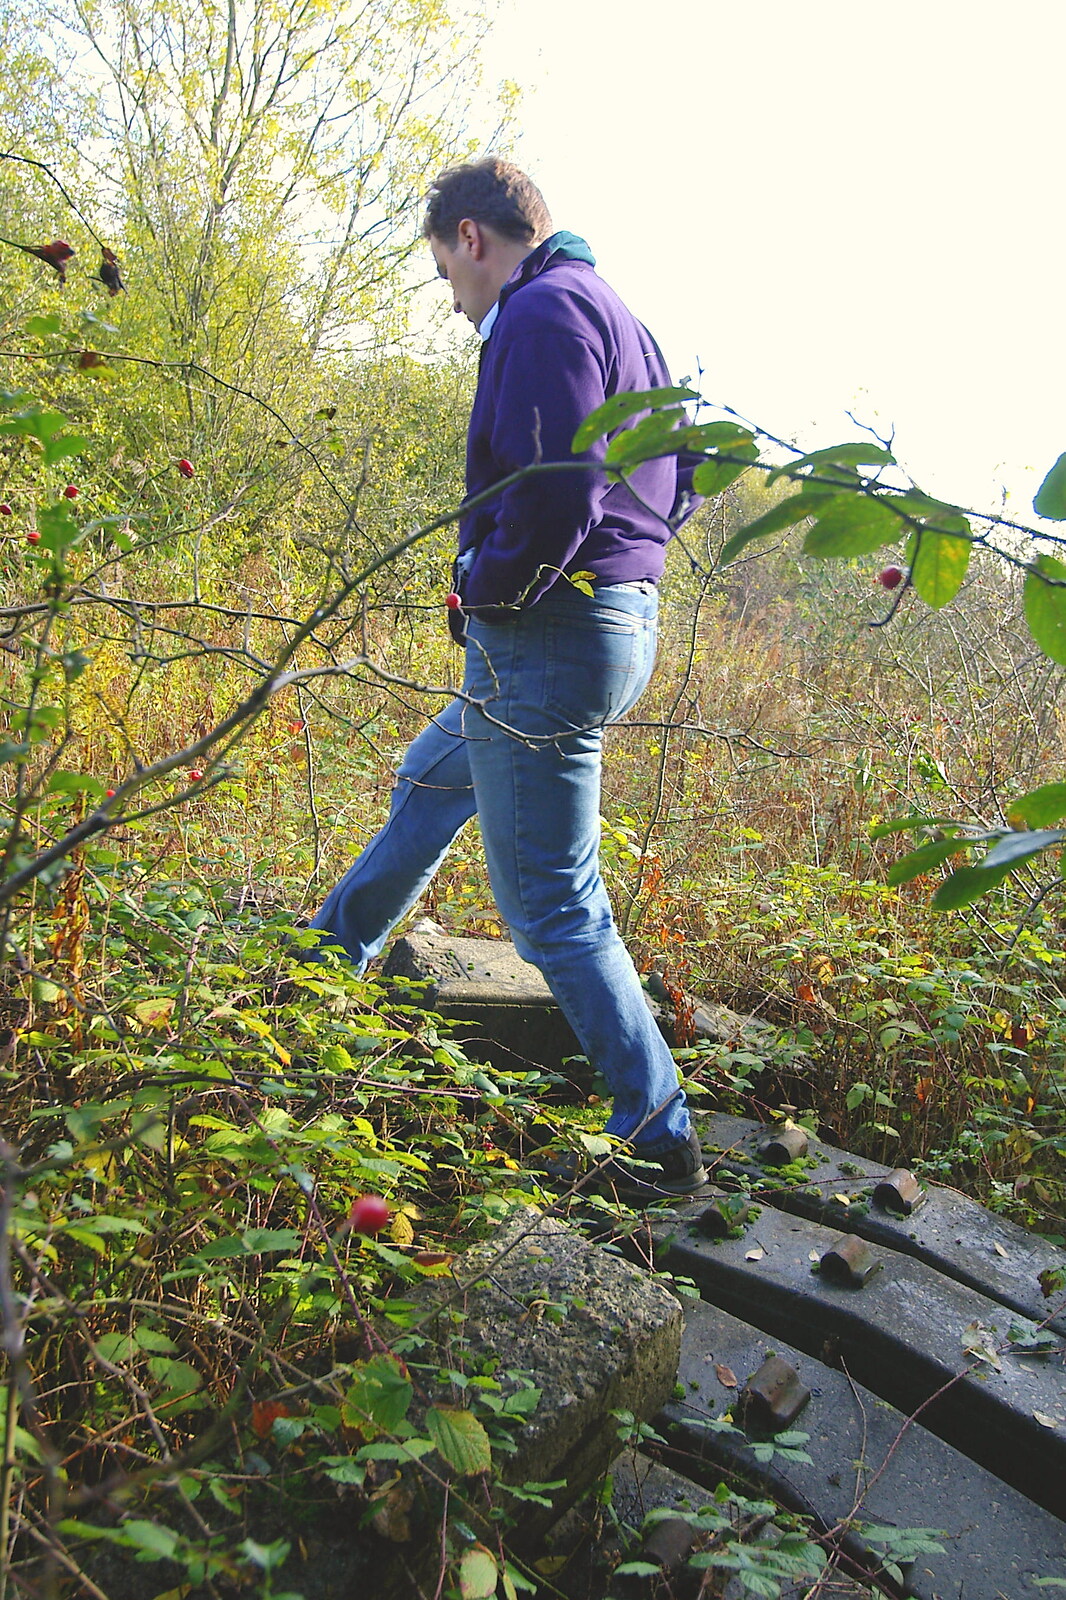 Dan climbs up after we sneak through the fence from Disused Cambridge Railway, Milton Road, Cambridge - 28th October 2005